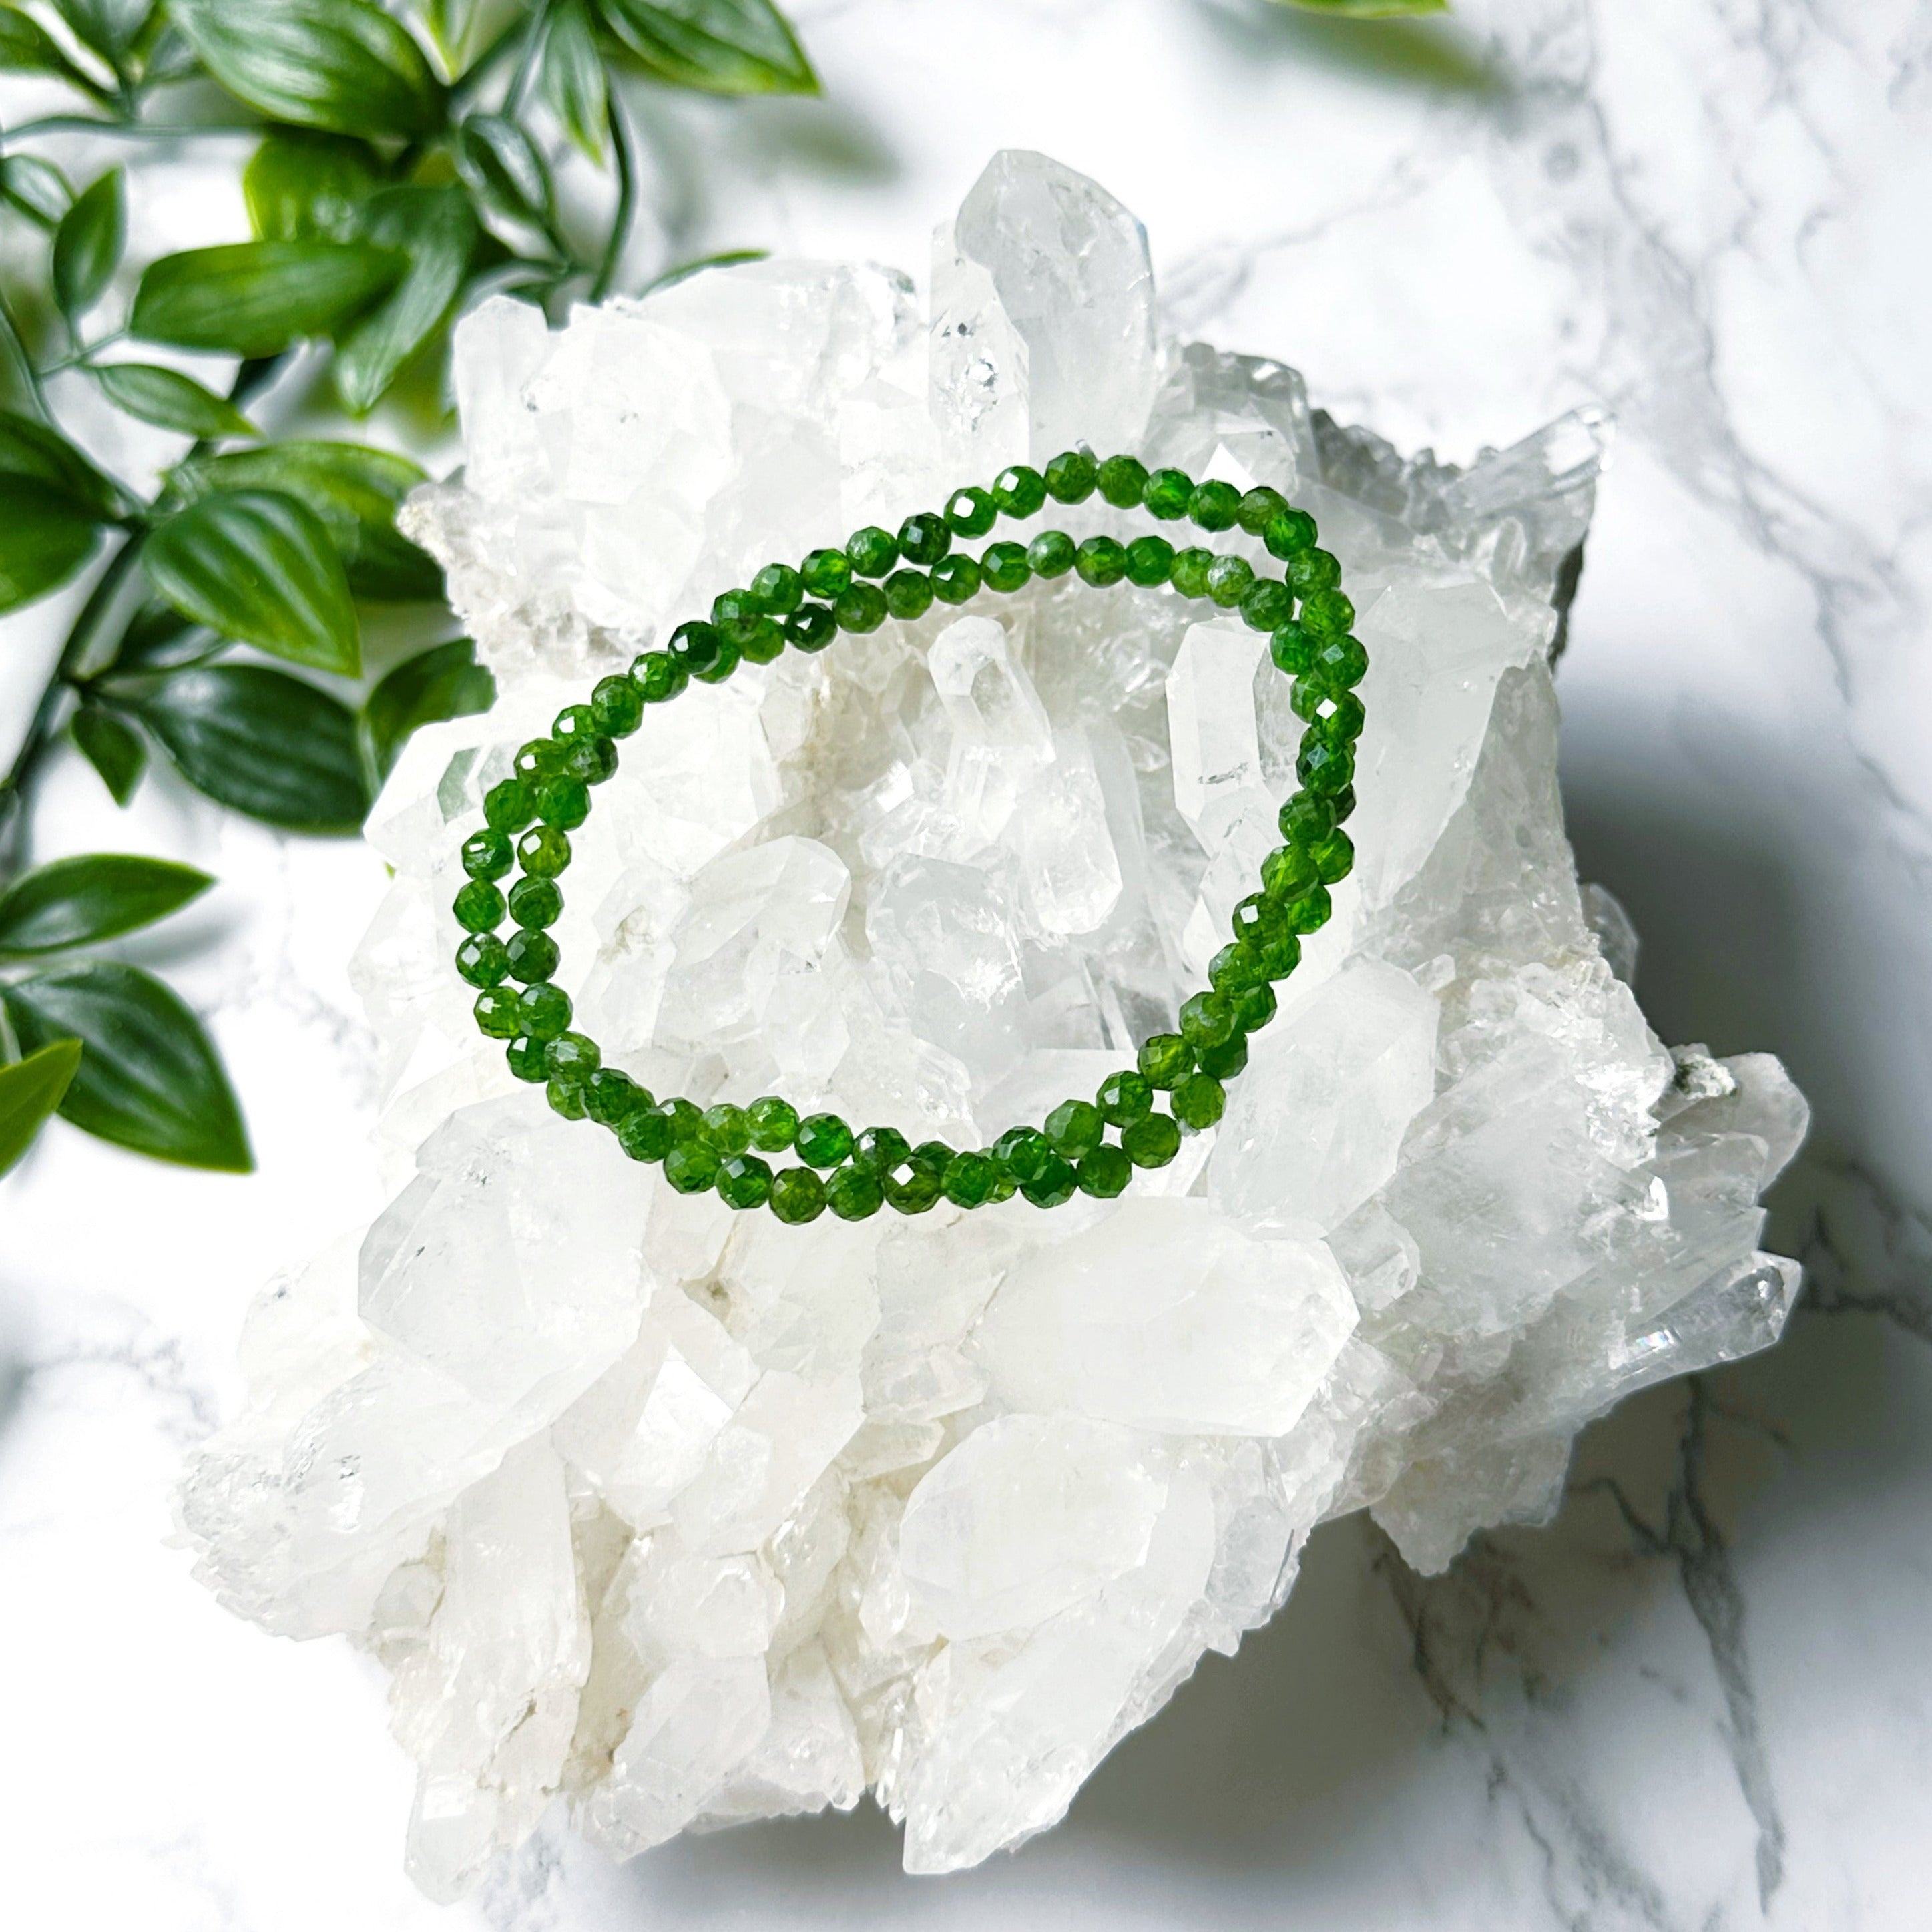 CHROME DIOPSIDE (FACETED) 4mm - HANDMADE CRYSTAL BRACELET - 4mm, april astro, bracelet, chrome diopside, crystal bracelet, faceted, green, handmade bracelet, jewelry, love gift bundle, market bracelet, mini, mini update, recently added, Wearable - The Mineral Maven